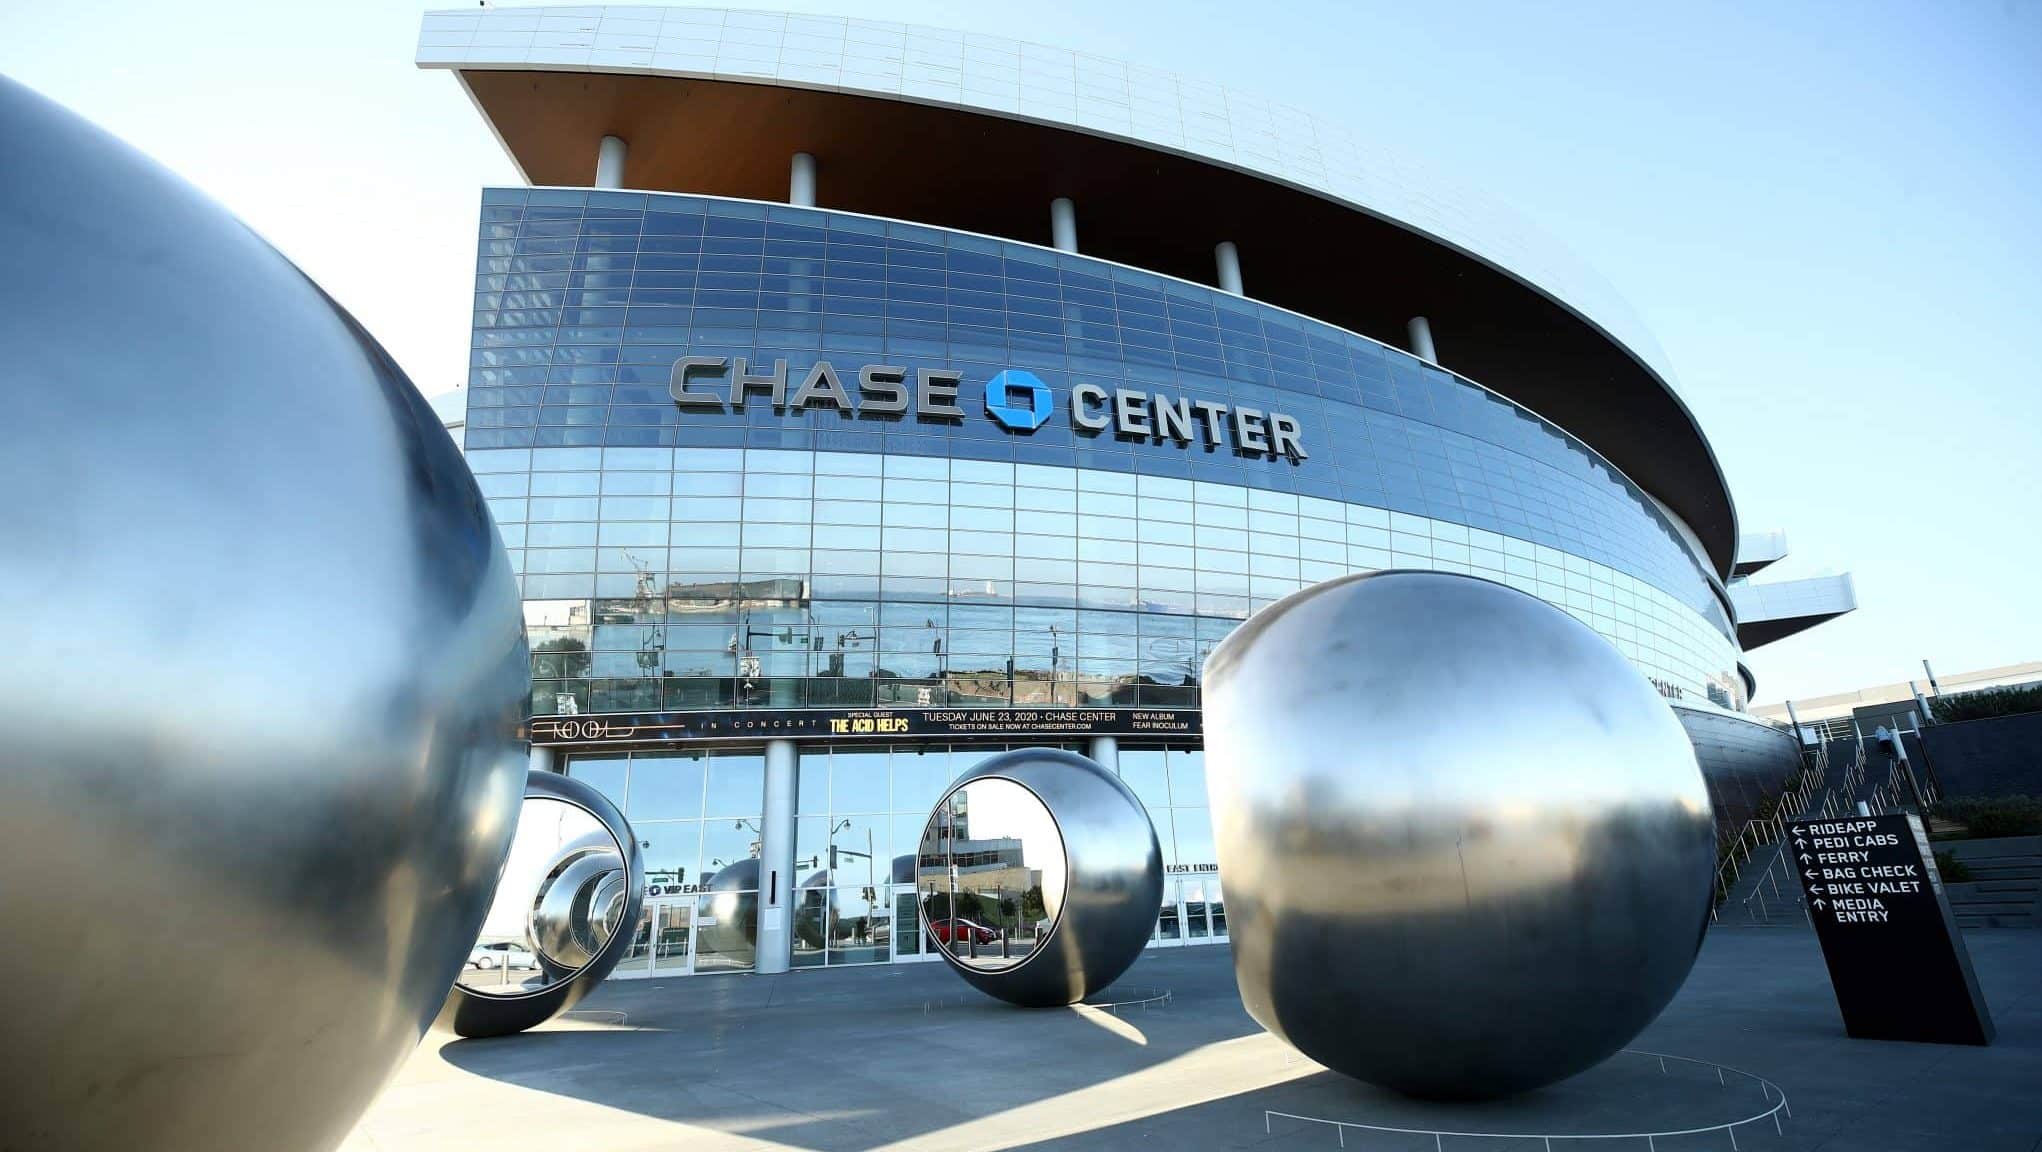 SAN FRANCISCO, CALIFORNIA - MARCH 12: An exterior view of the Chase Center, where the NBA Golden State Warriors play on March 12, 2020 in San Francisco, California. The Warriors were supposed to host the Brooklyn Nets tonight, but the game was postponed due to the coronavirus. The NBA, NHL, NCAA and MLB have all announced cancellations or postponements of events because of the COVID-19.